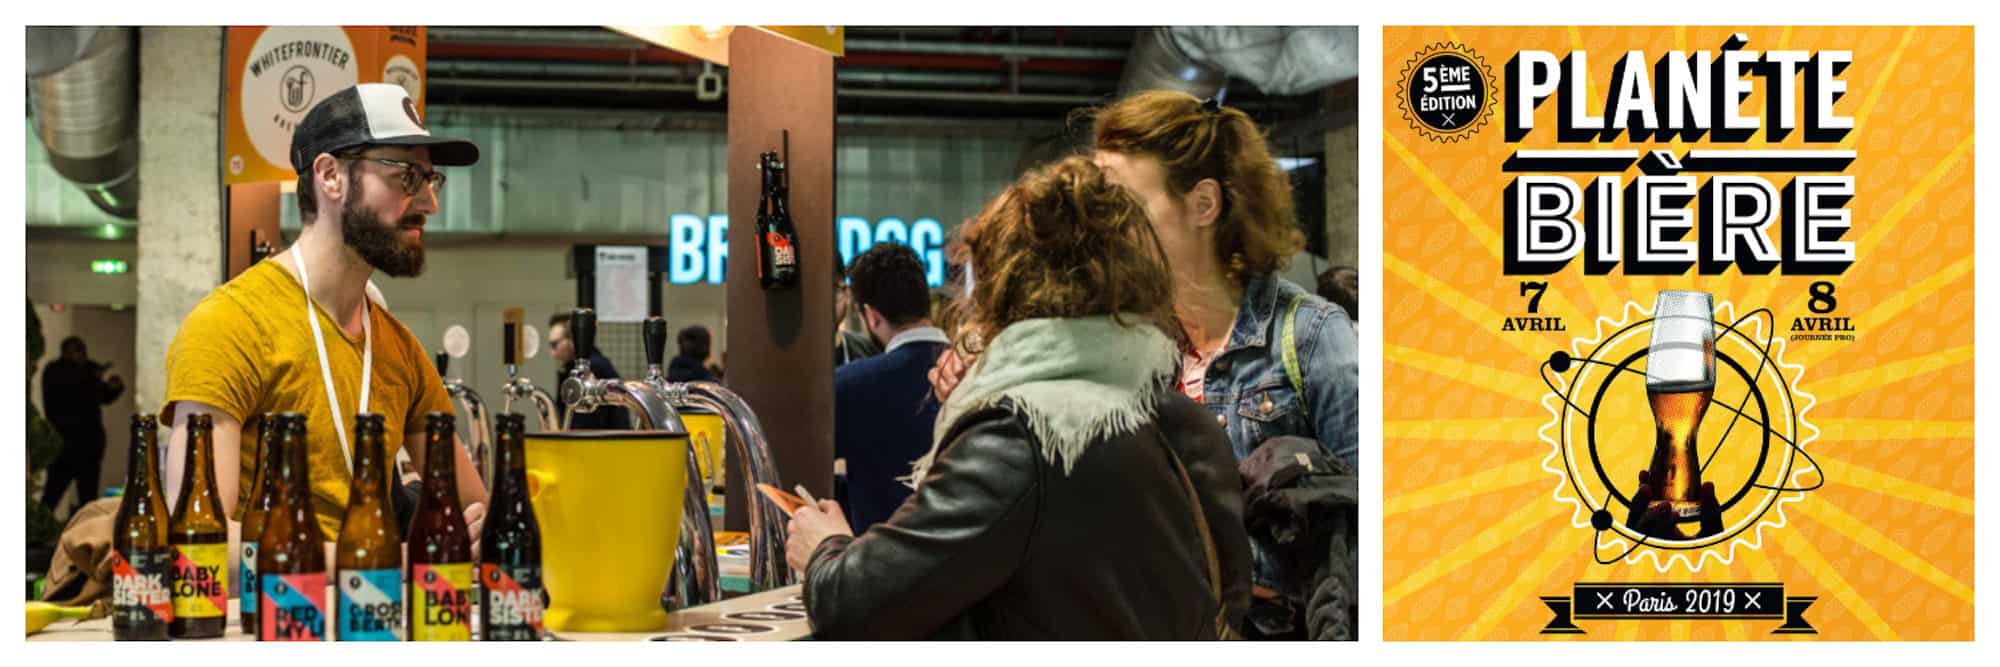 Events in Paris in April include beer festival Planète Bière, where visitors can taste lots of different beers like these two ladies at a bar at the event (left). The flyer for the Planète Bière beer festival in Paris in April (right).